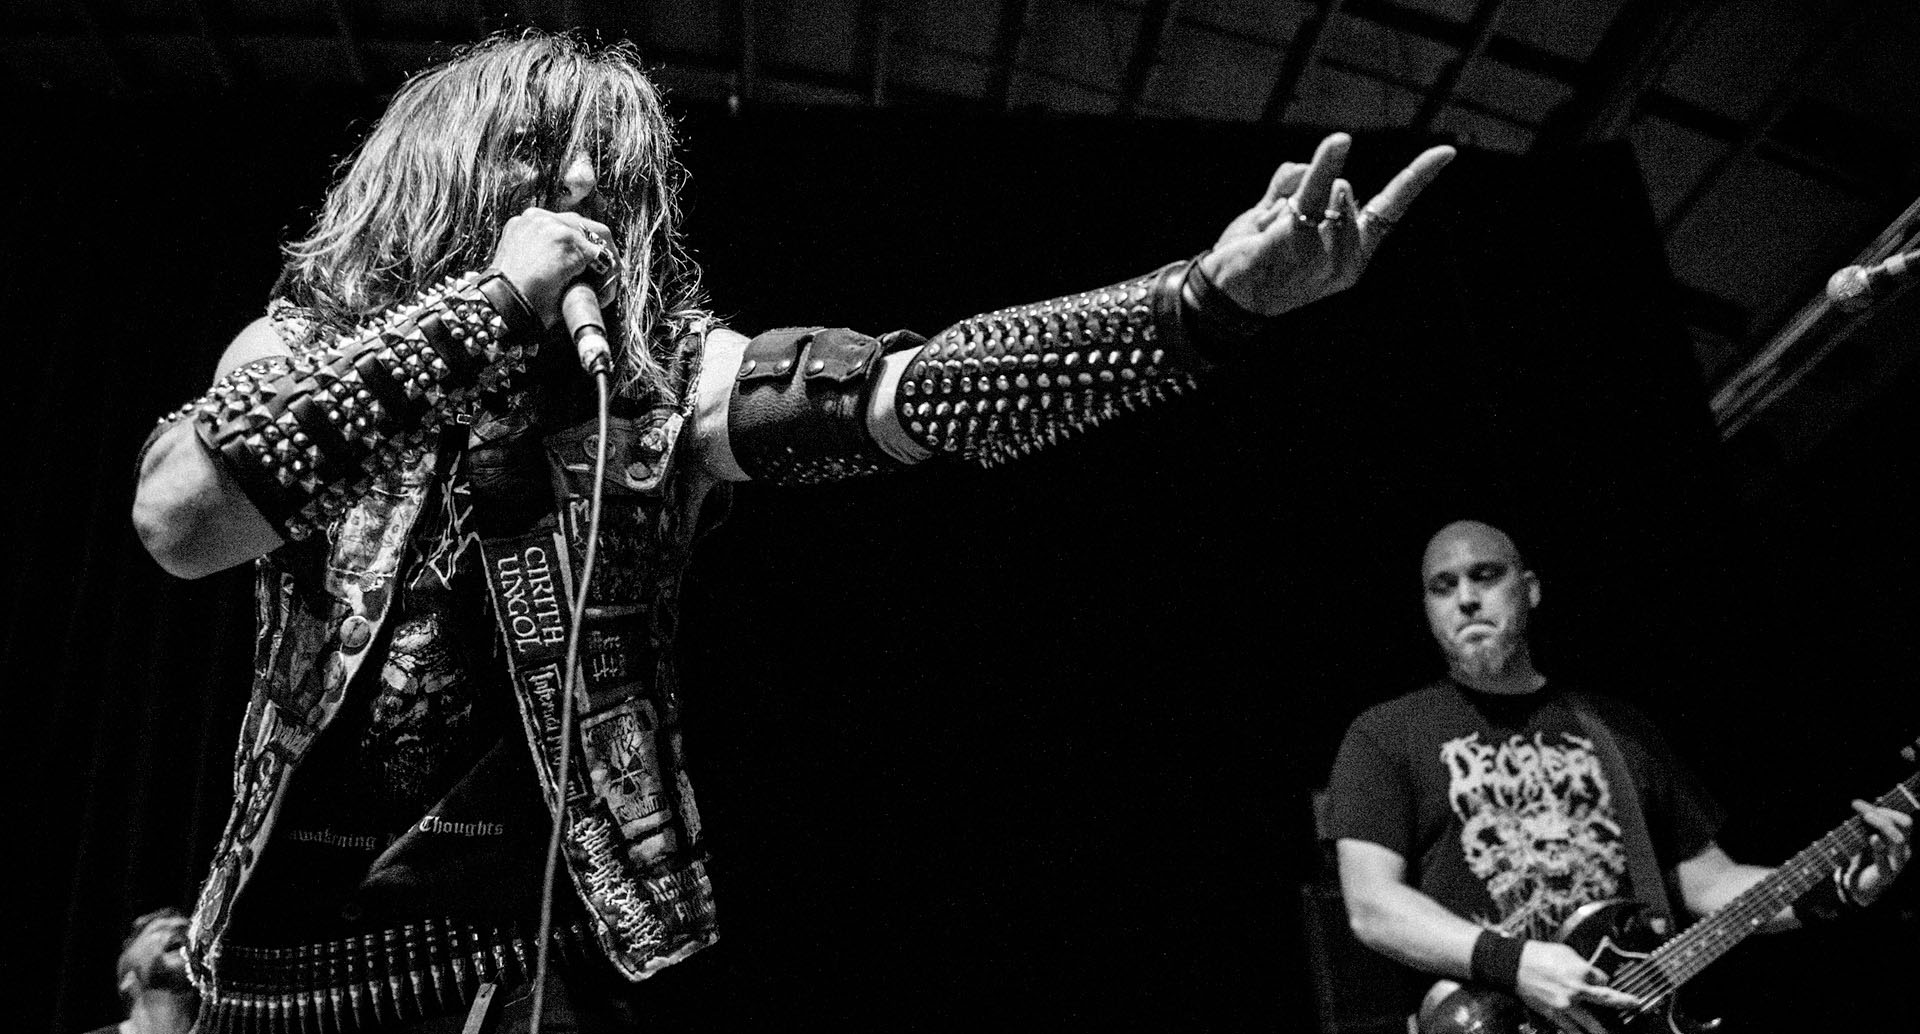  Nunslaughter Live in Singapore